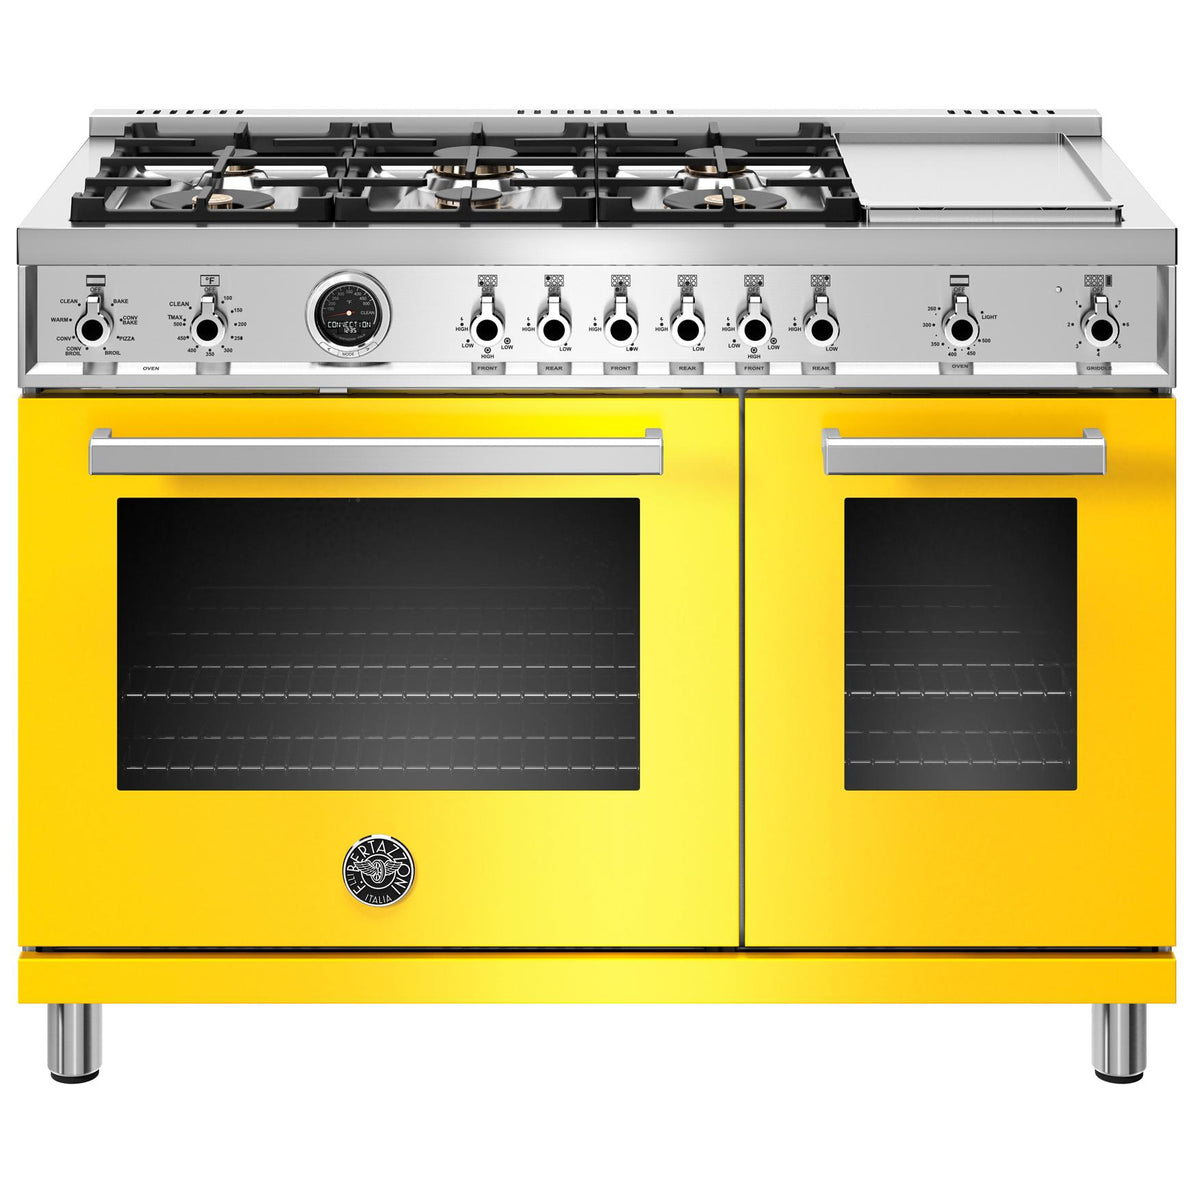 48-inch Freestanding Dual-Fuel Range with Convection PROF486GDFSGIT IMAGE 1